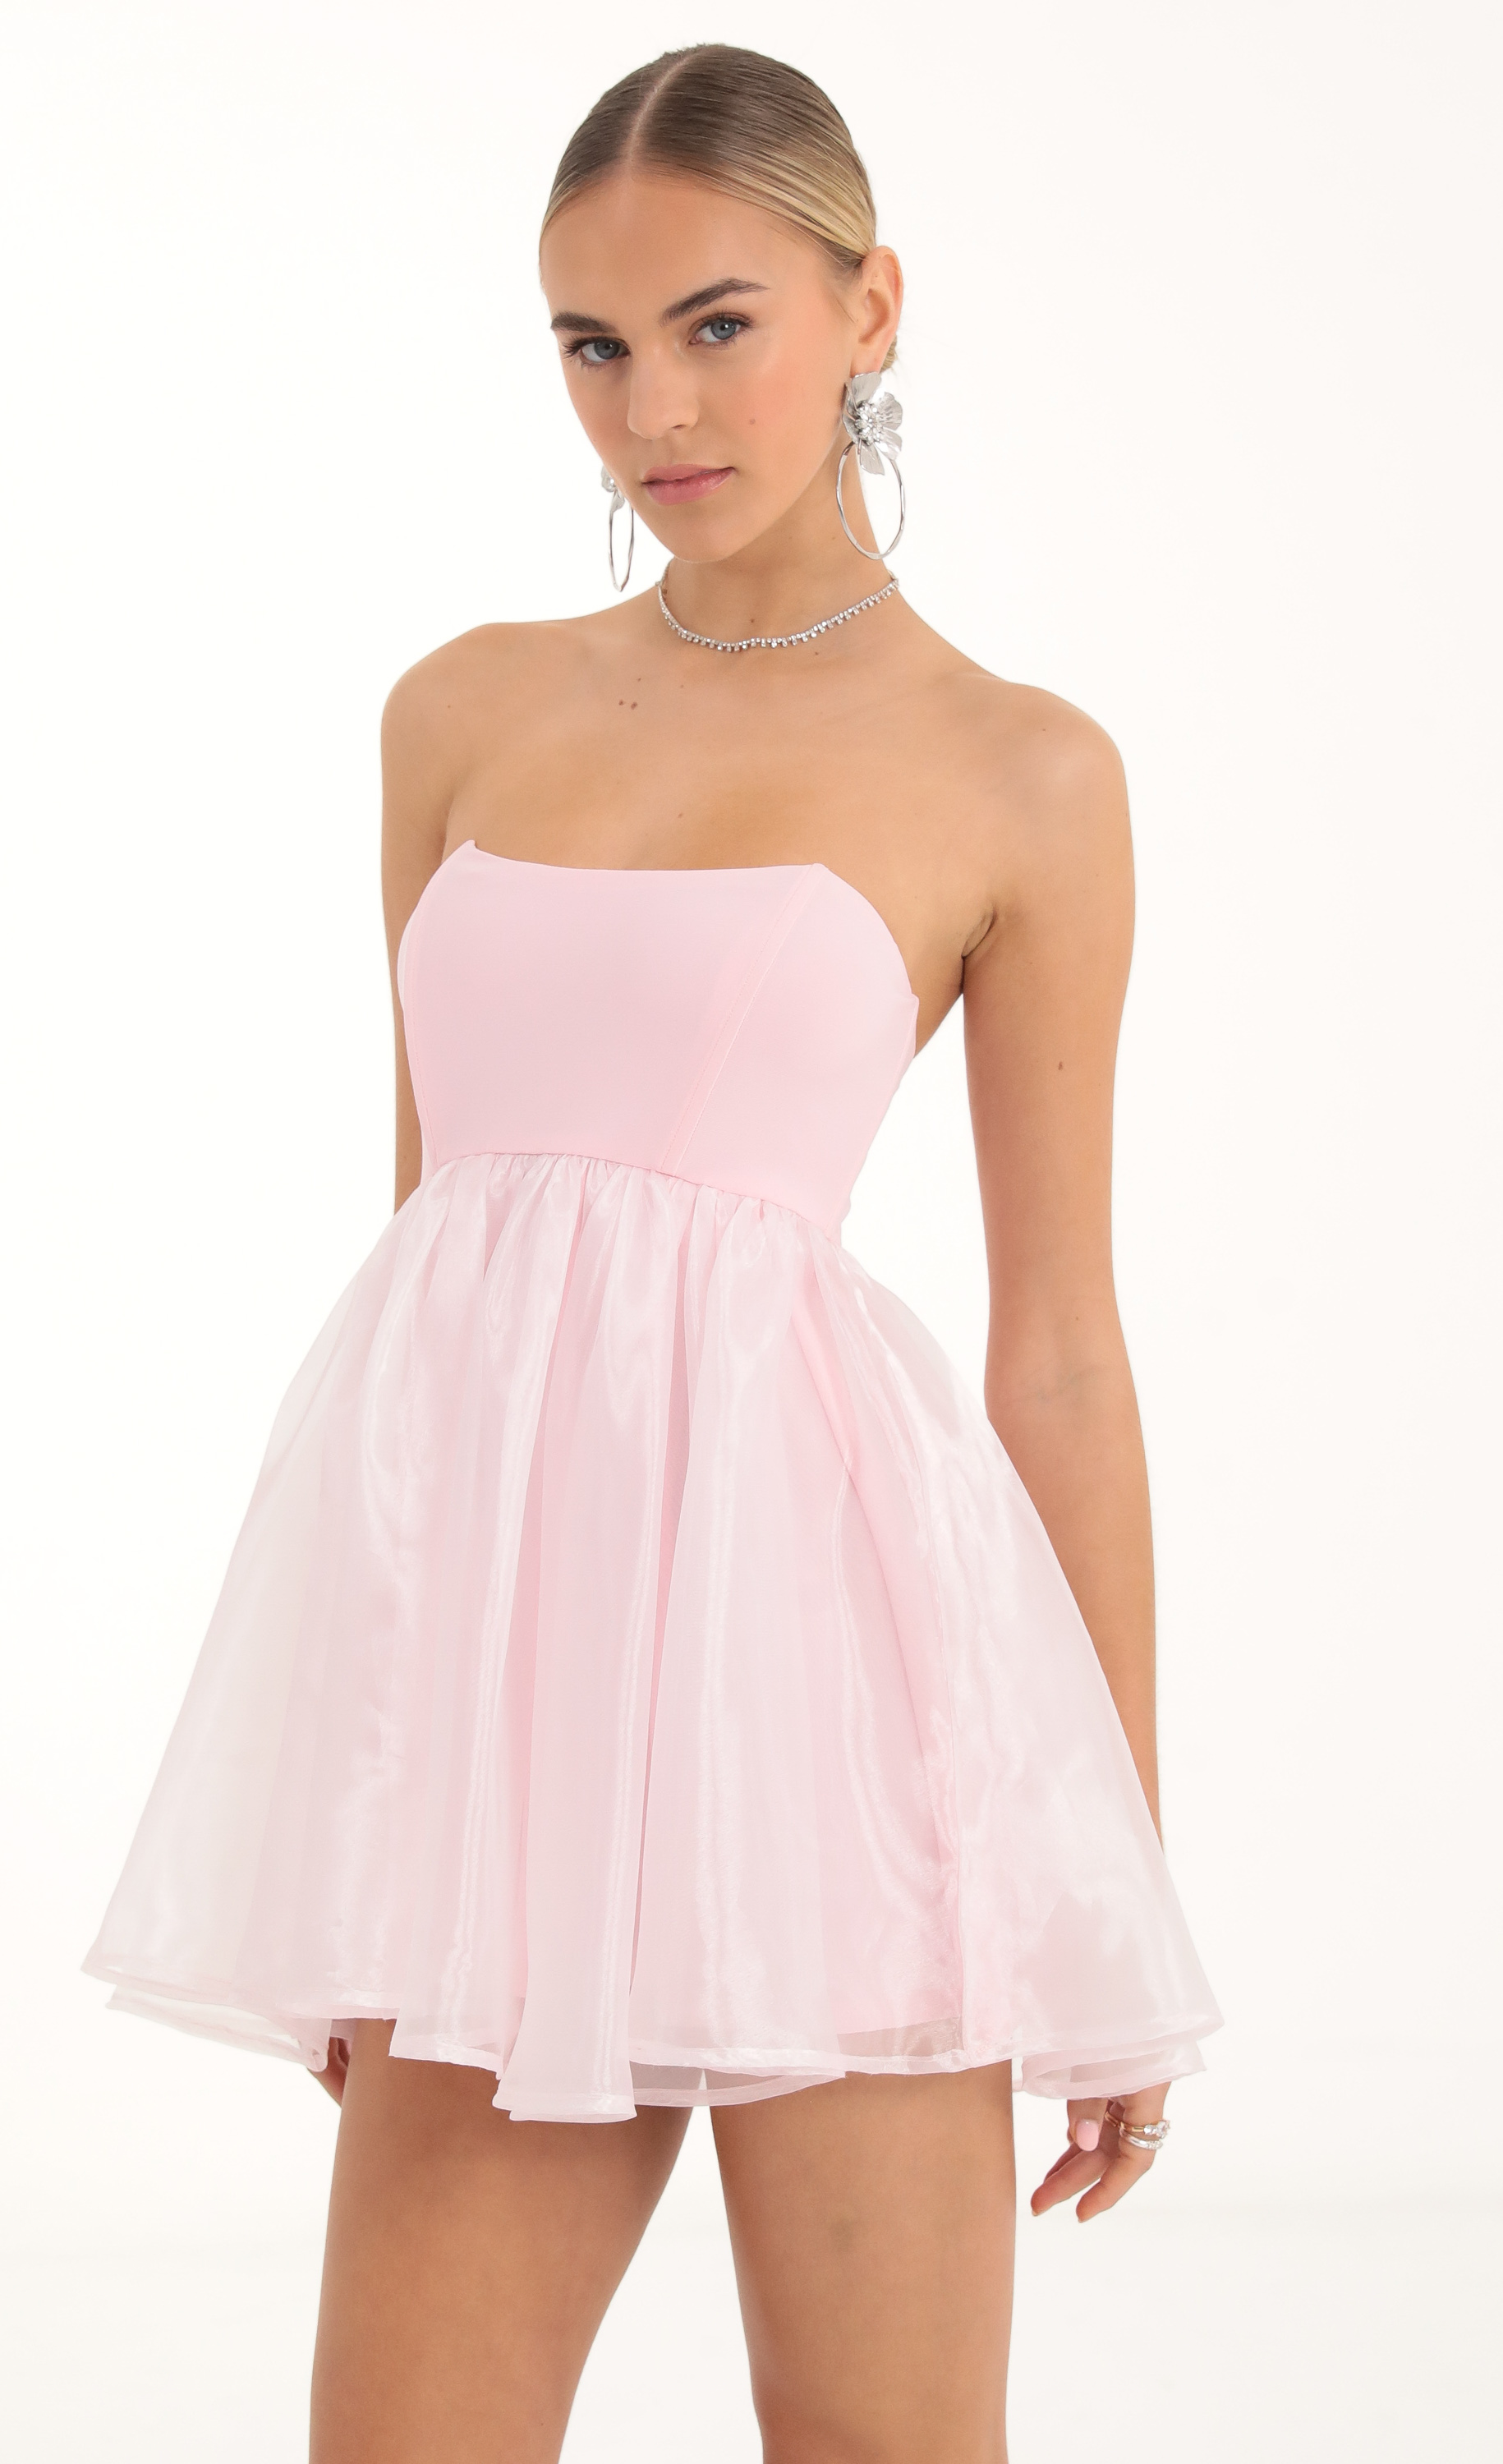 Paloma Corset Baby Doll Dress in Pink